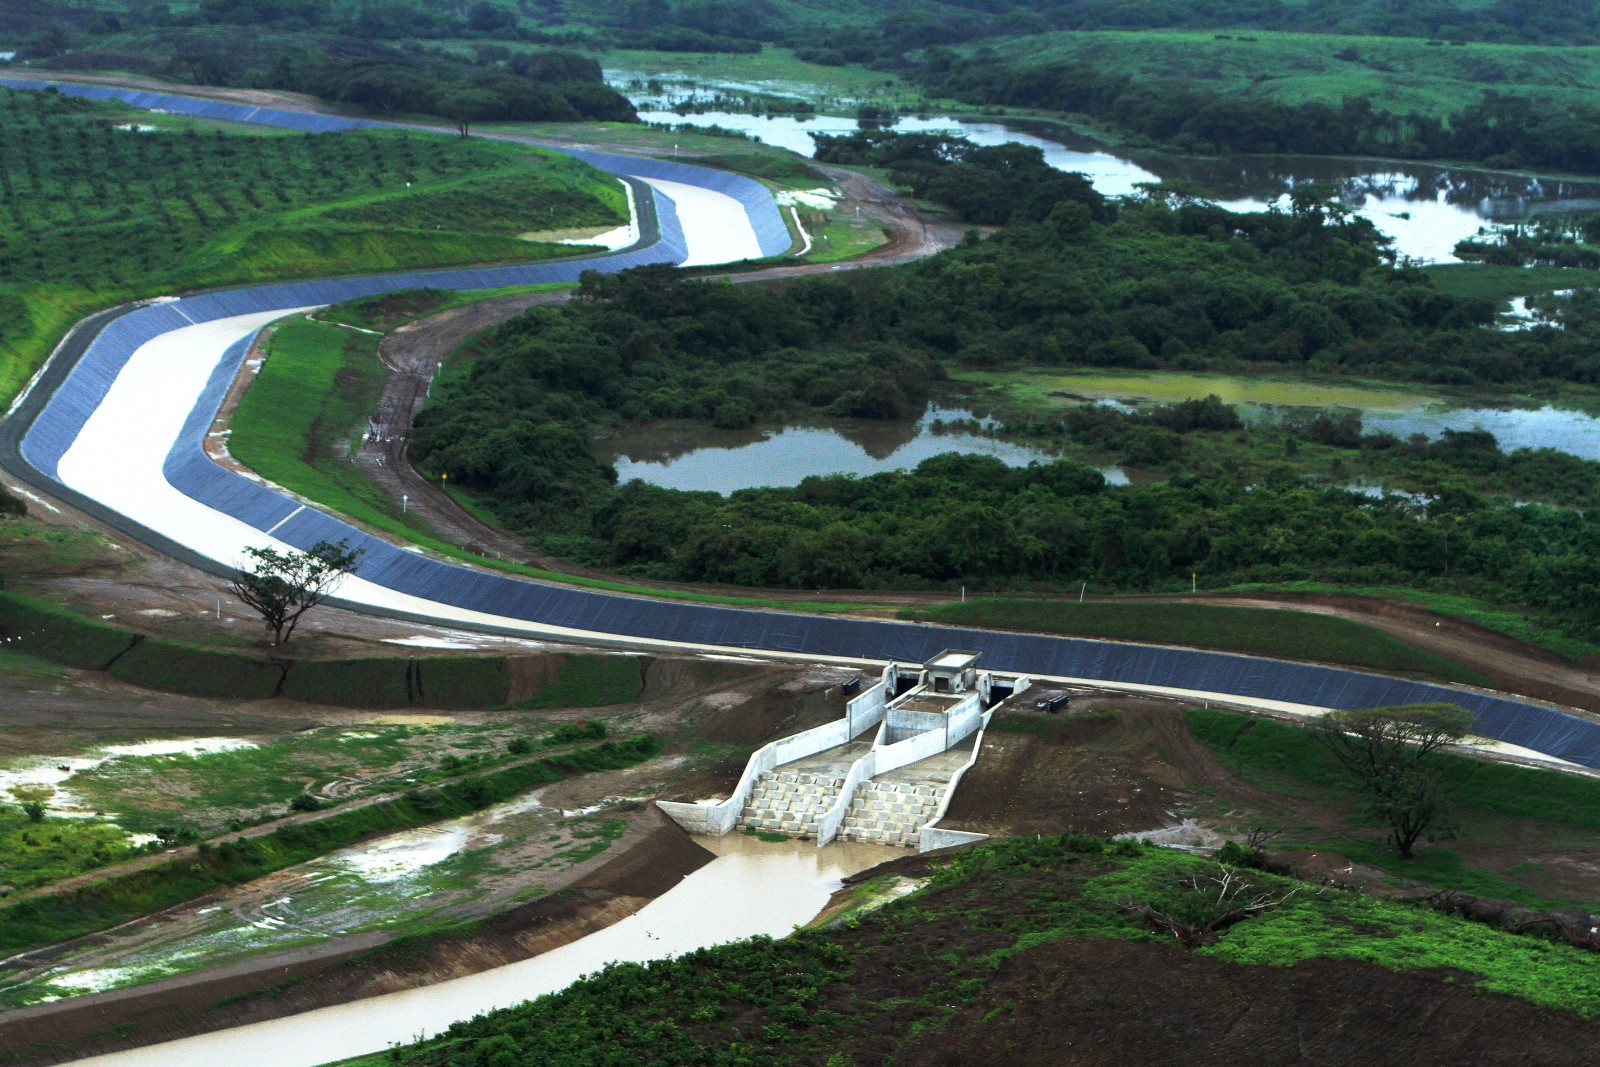 The Daule-Vinces water transfer scheme in Guayas and Los Rios provinces is one of a series of national water projects meant to control irrigation and floodwaters in Ecuador. Photo by César Muñoz / ANDES via Flickr Creative Commons 